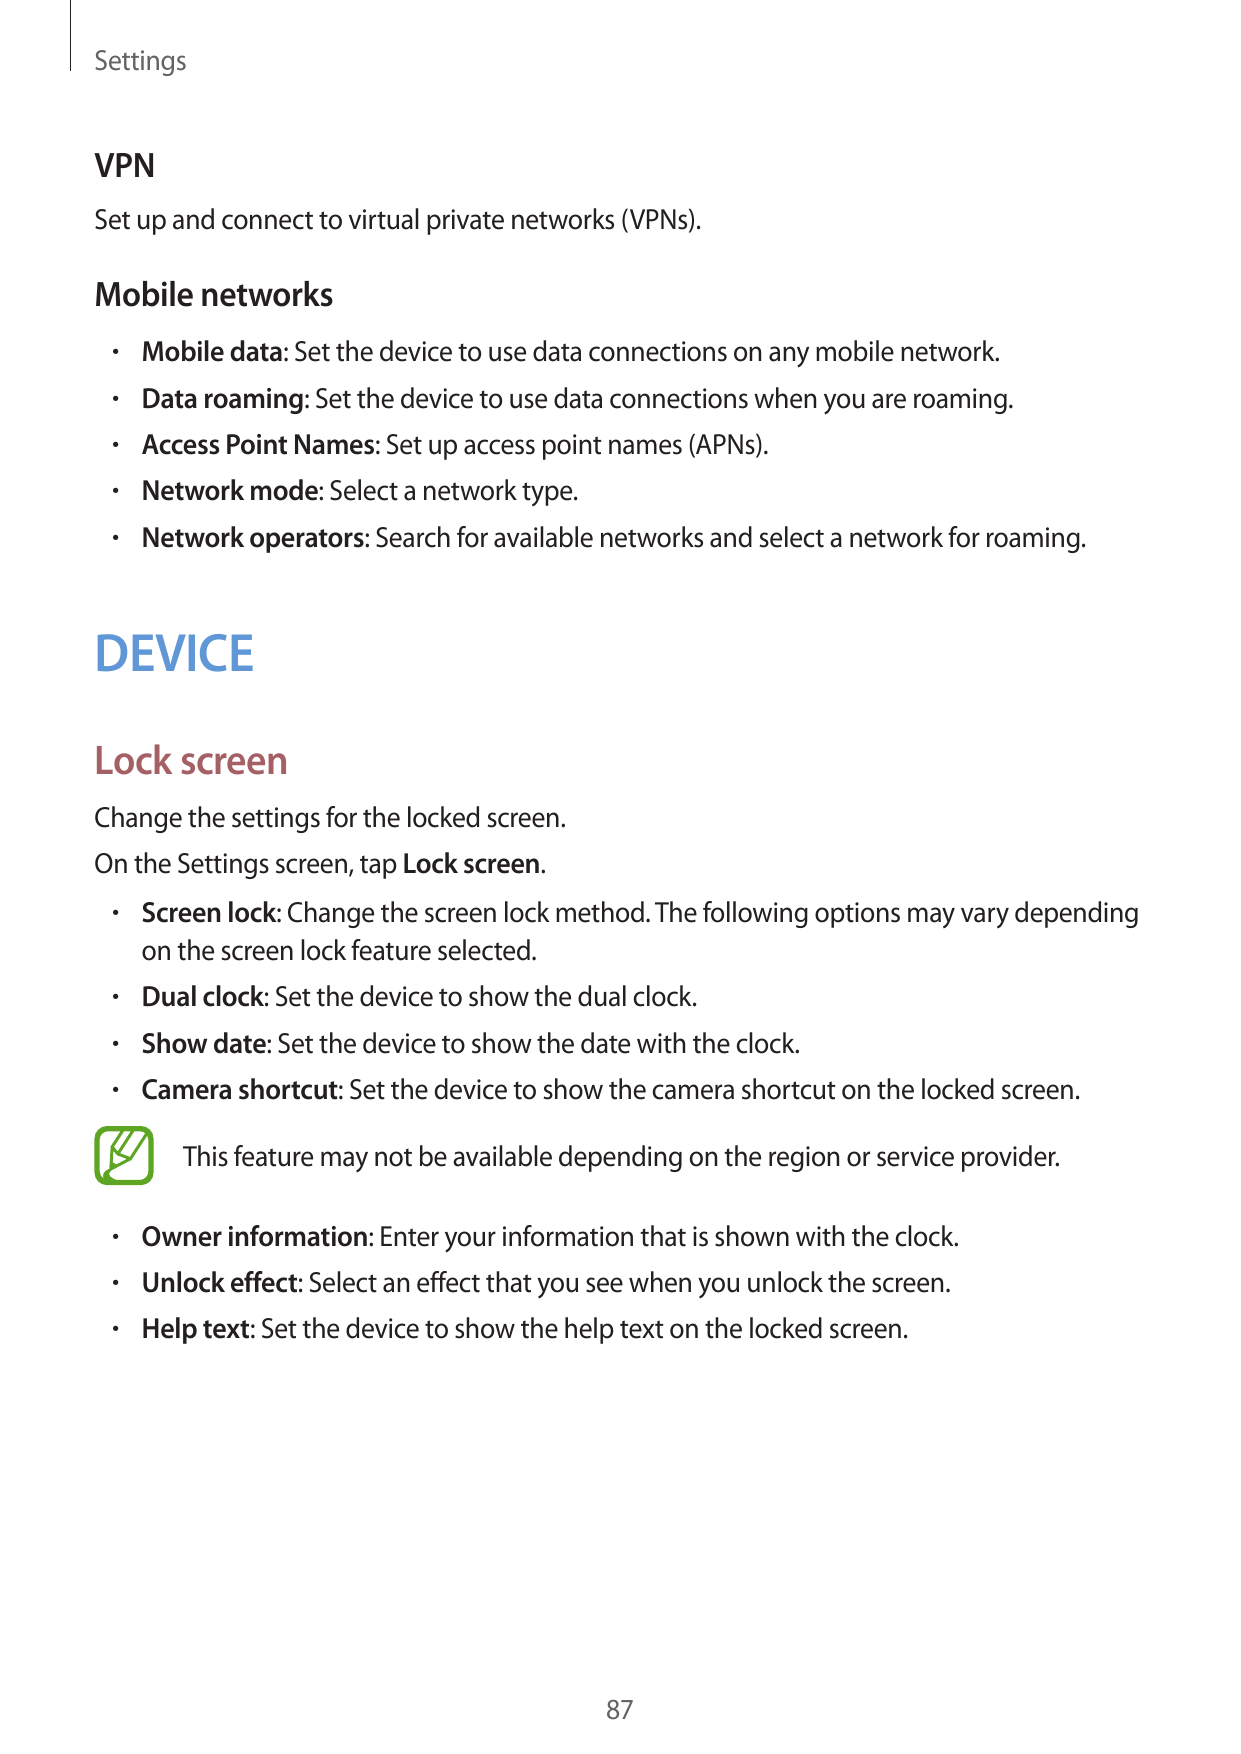 SettingsVPNSet up and connect to virtual private networks (VPNs).Mobile networks• Mobile data: Set the device to use data connec